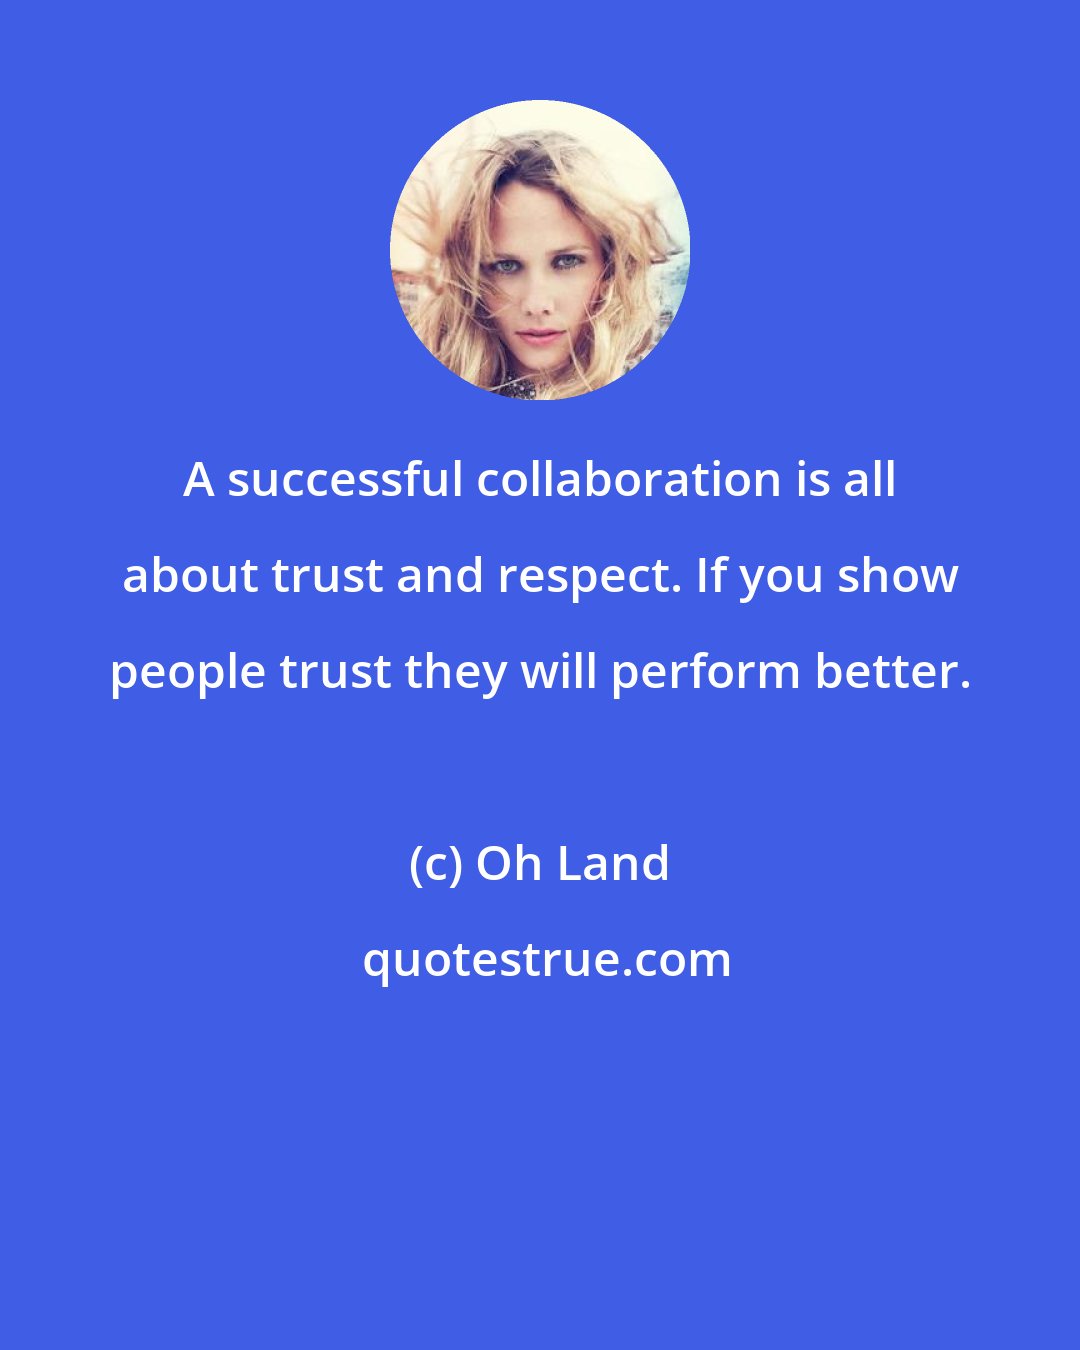 Oh Land: A successful collaboration is all about trust and respect. If you show people trust they will perform better.